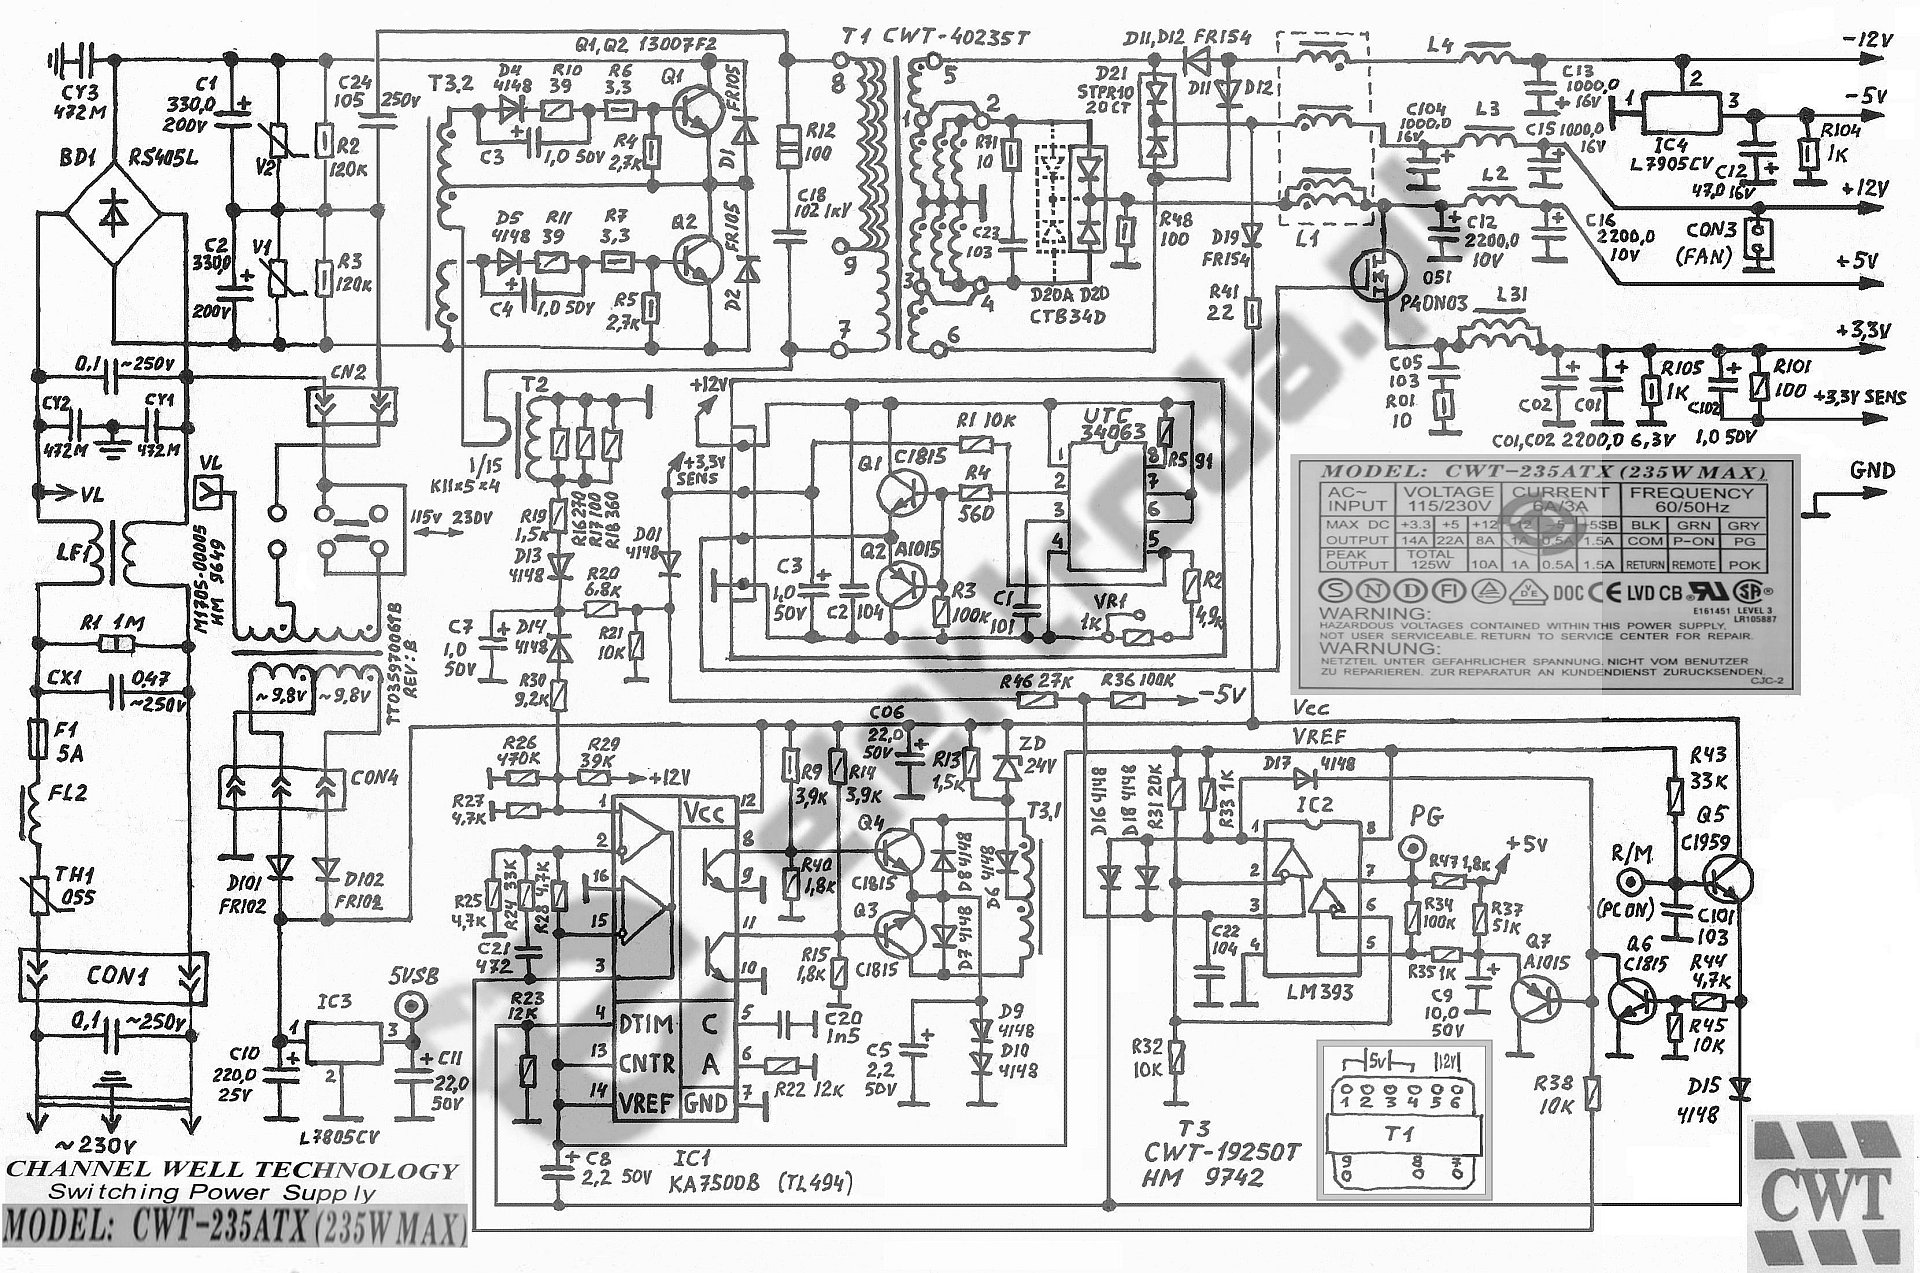 Ever Power CWT-235ATX CWT Channel Well CWT-235 ATX Power supply schematic